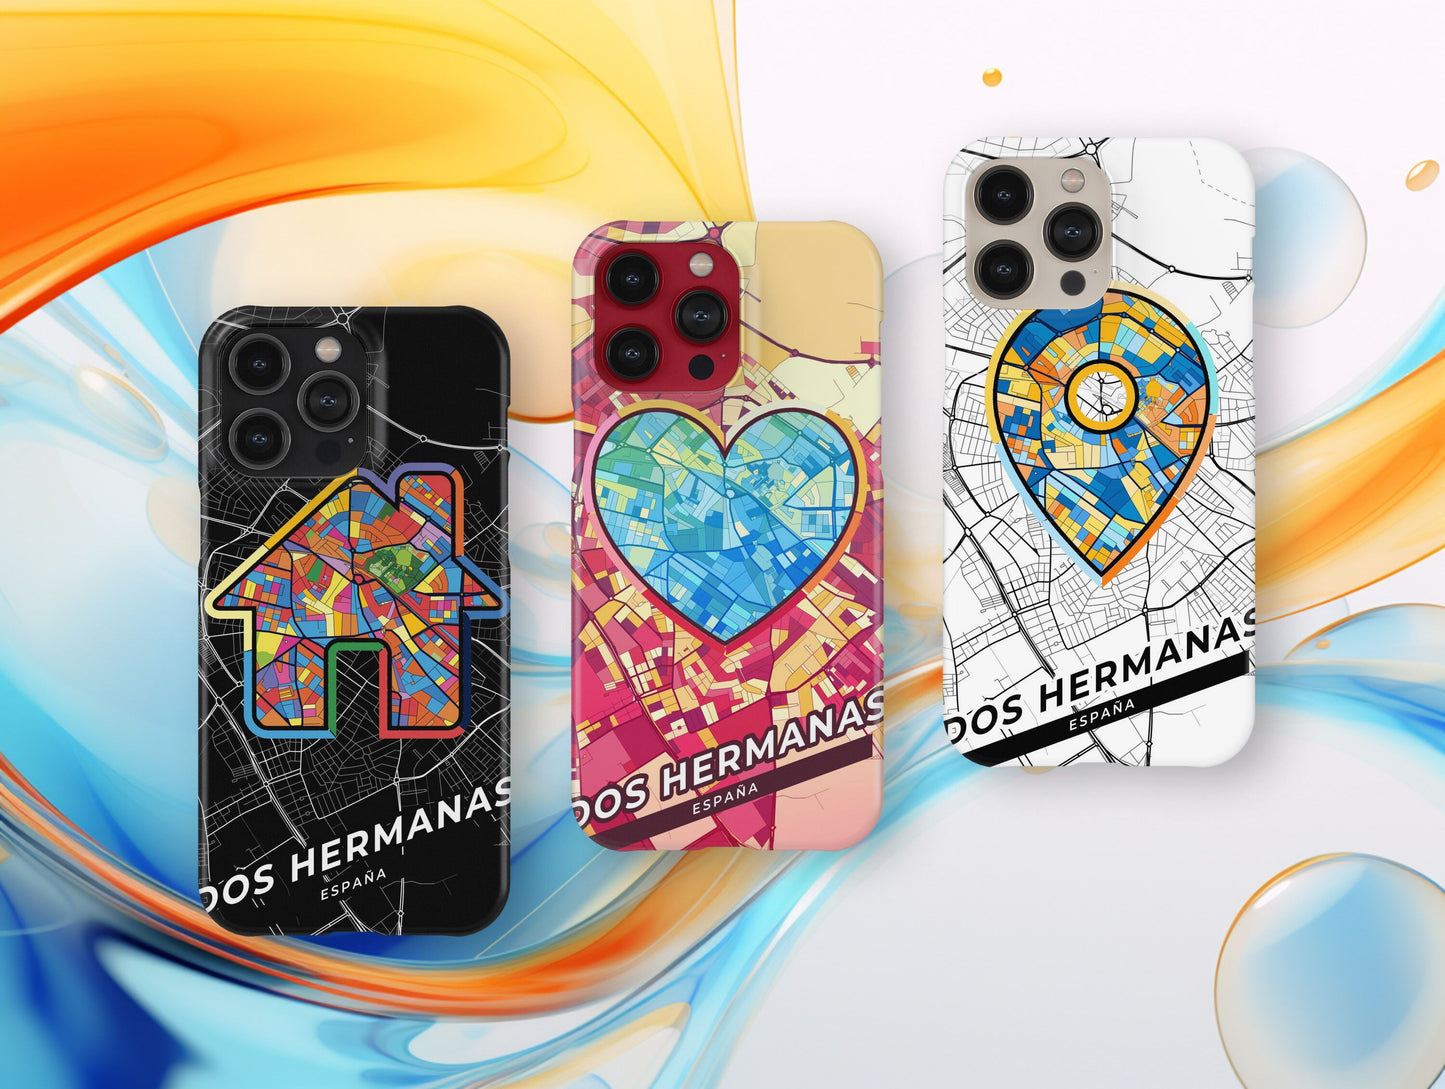 Dos Hermanas Spain slim phone case with colorful icon. Birthday, wedding or housewarming gift. Couple match cases.